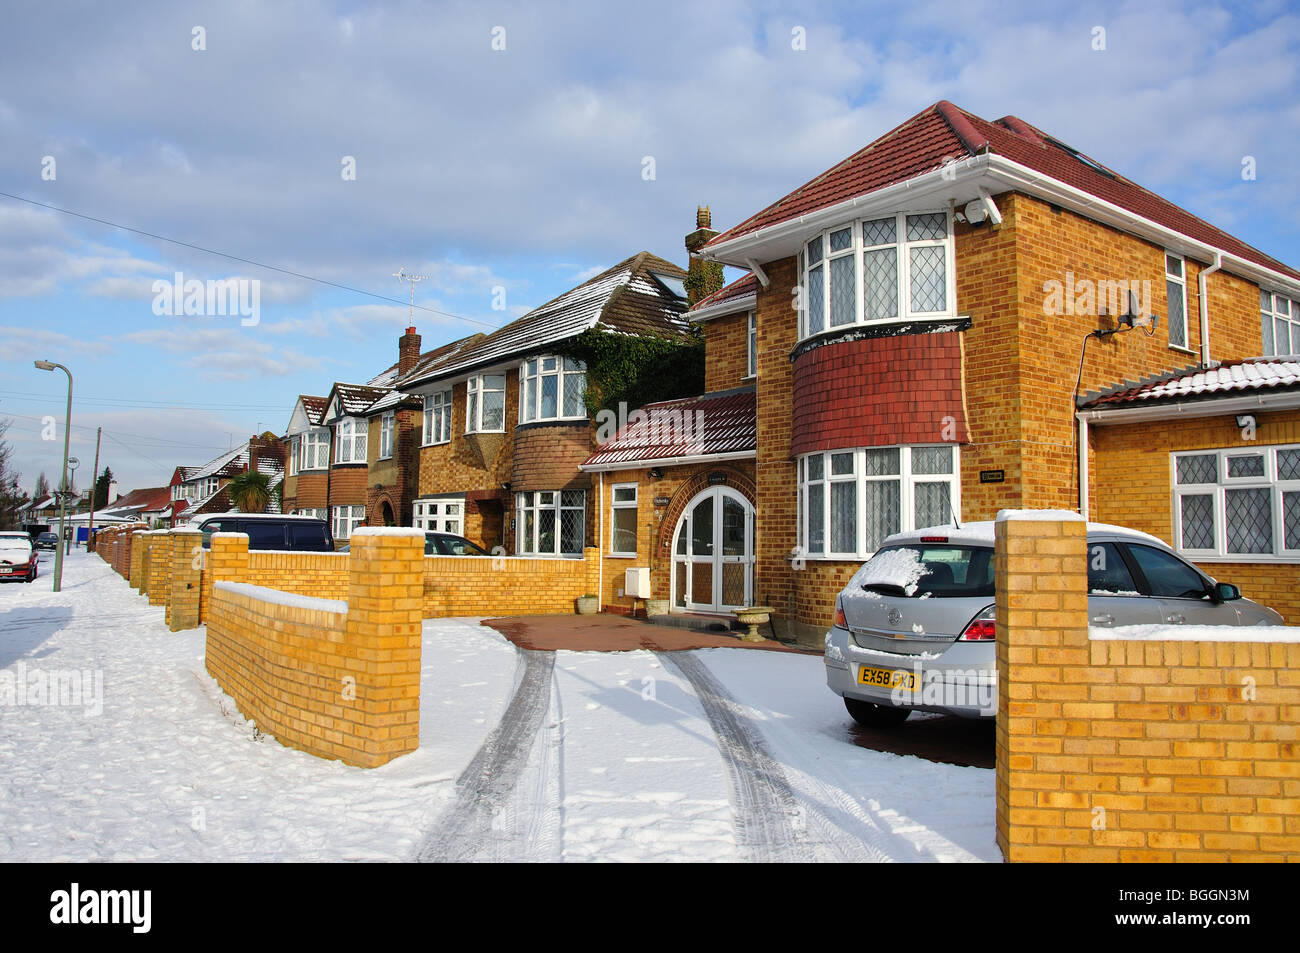 Houses and driveway in snow, Stanwell, Surrey, England, United Kingdom Stock Photo